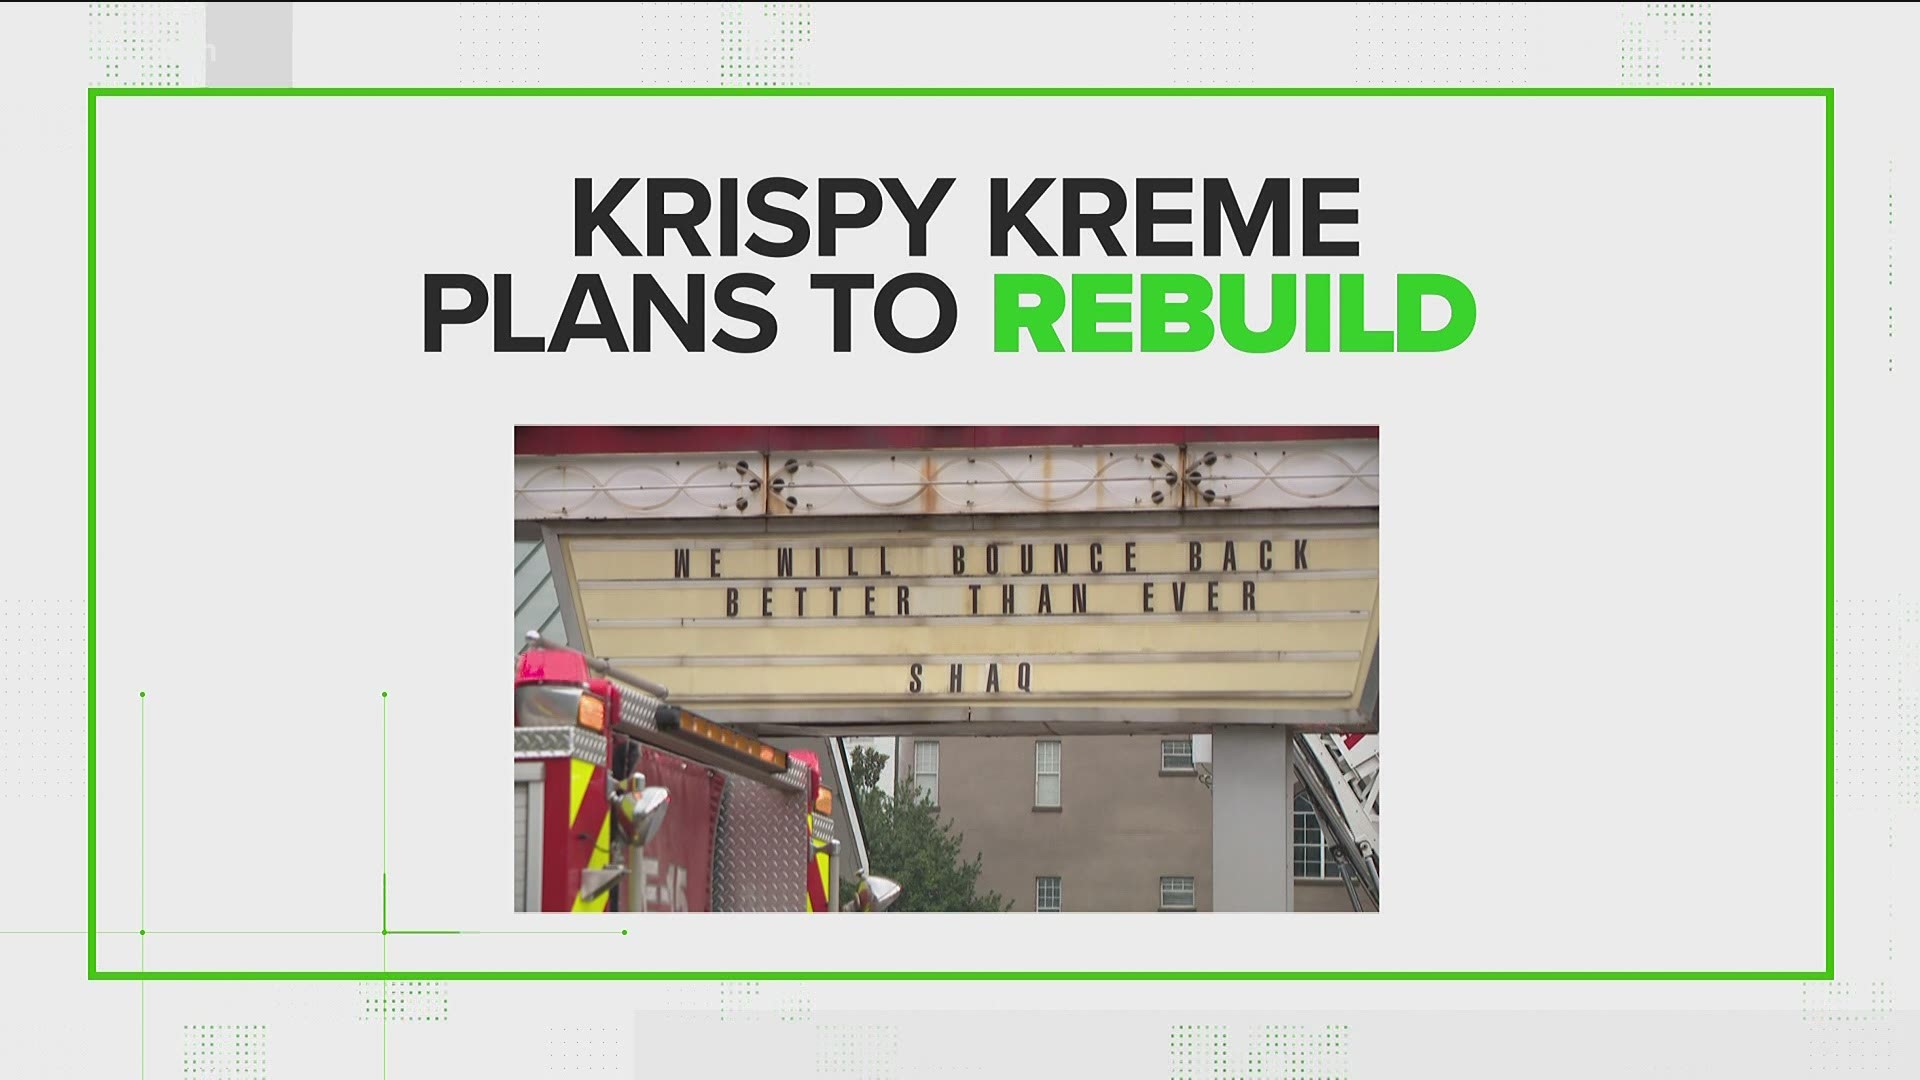 A month after a second fire at the Midtown donut shop, permits have been filed to demolish the iconic Krispy Kreme.